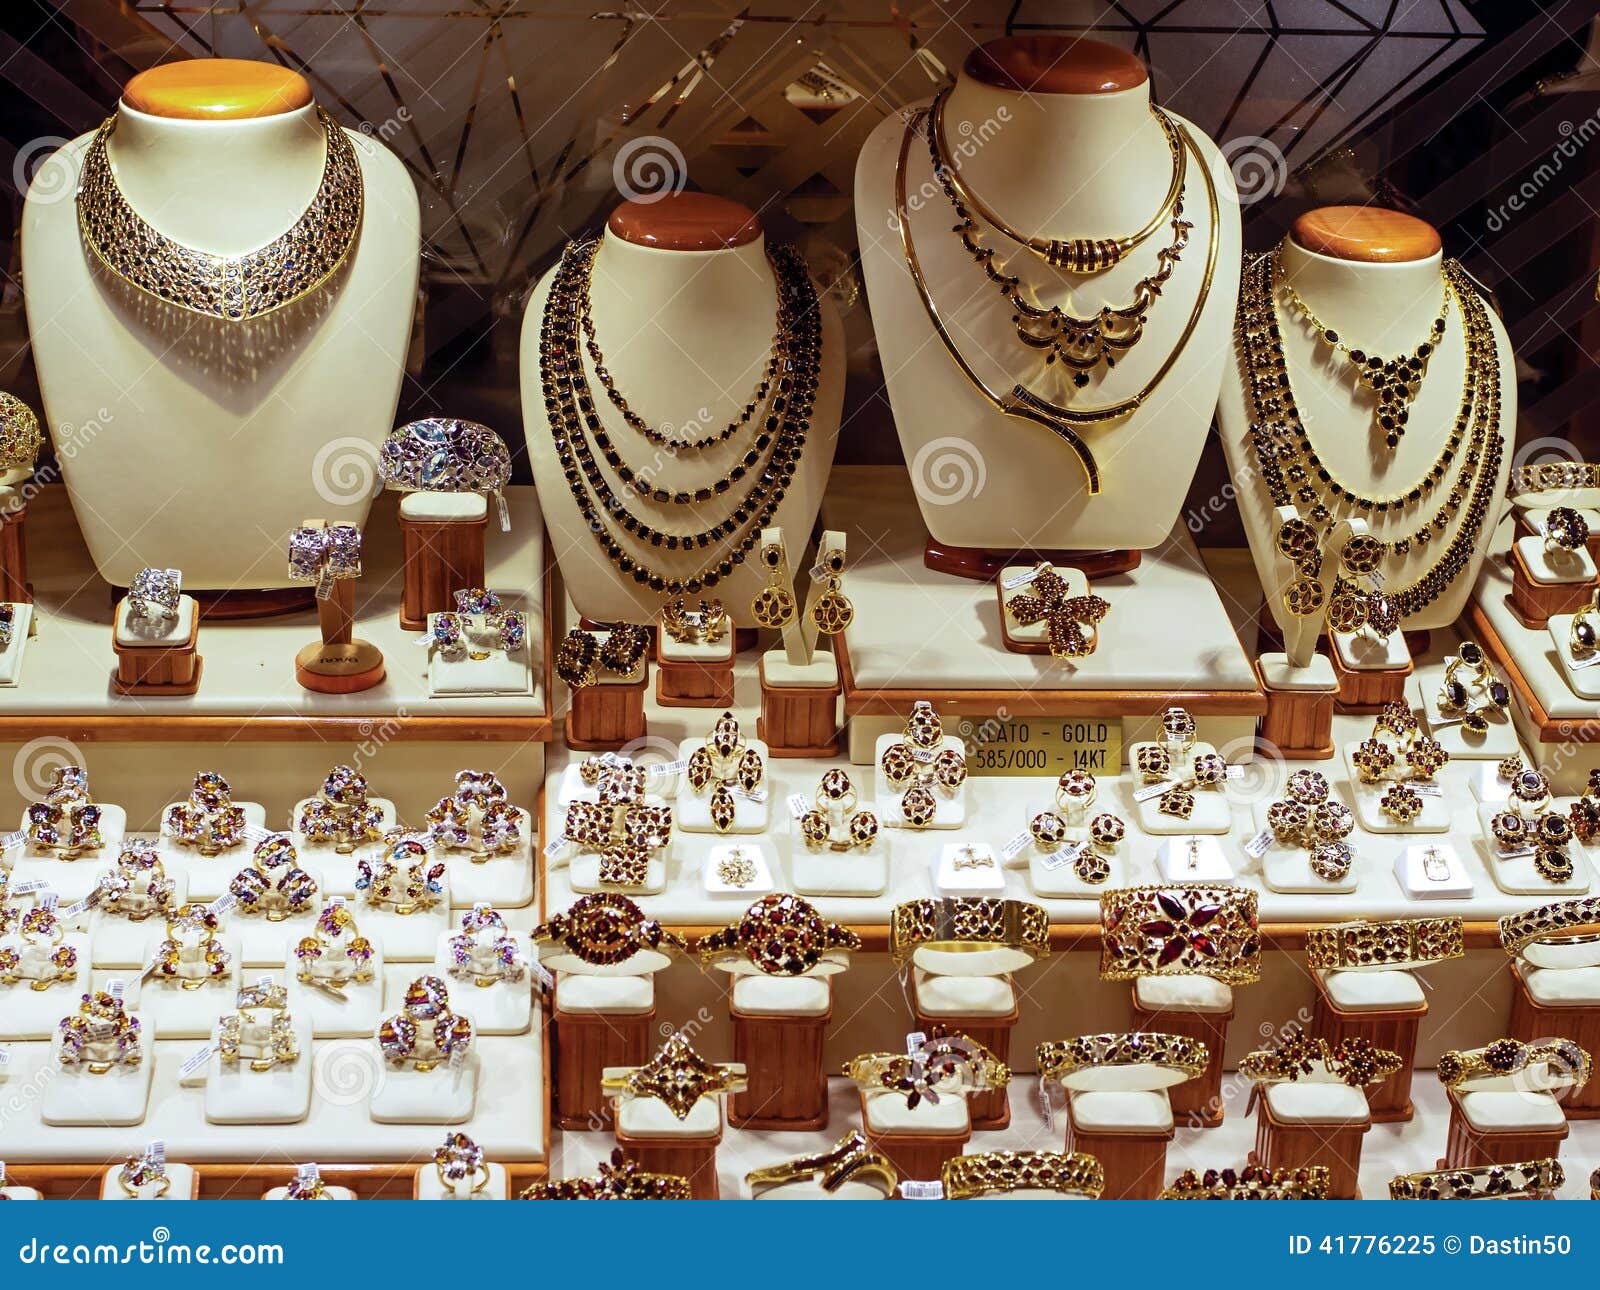 Set of luxury precious jewelry at sale in the shop Stock Photo by  ©frantic00 170157026